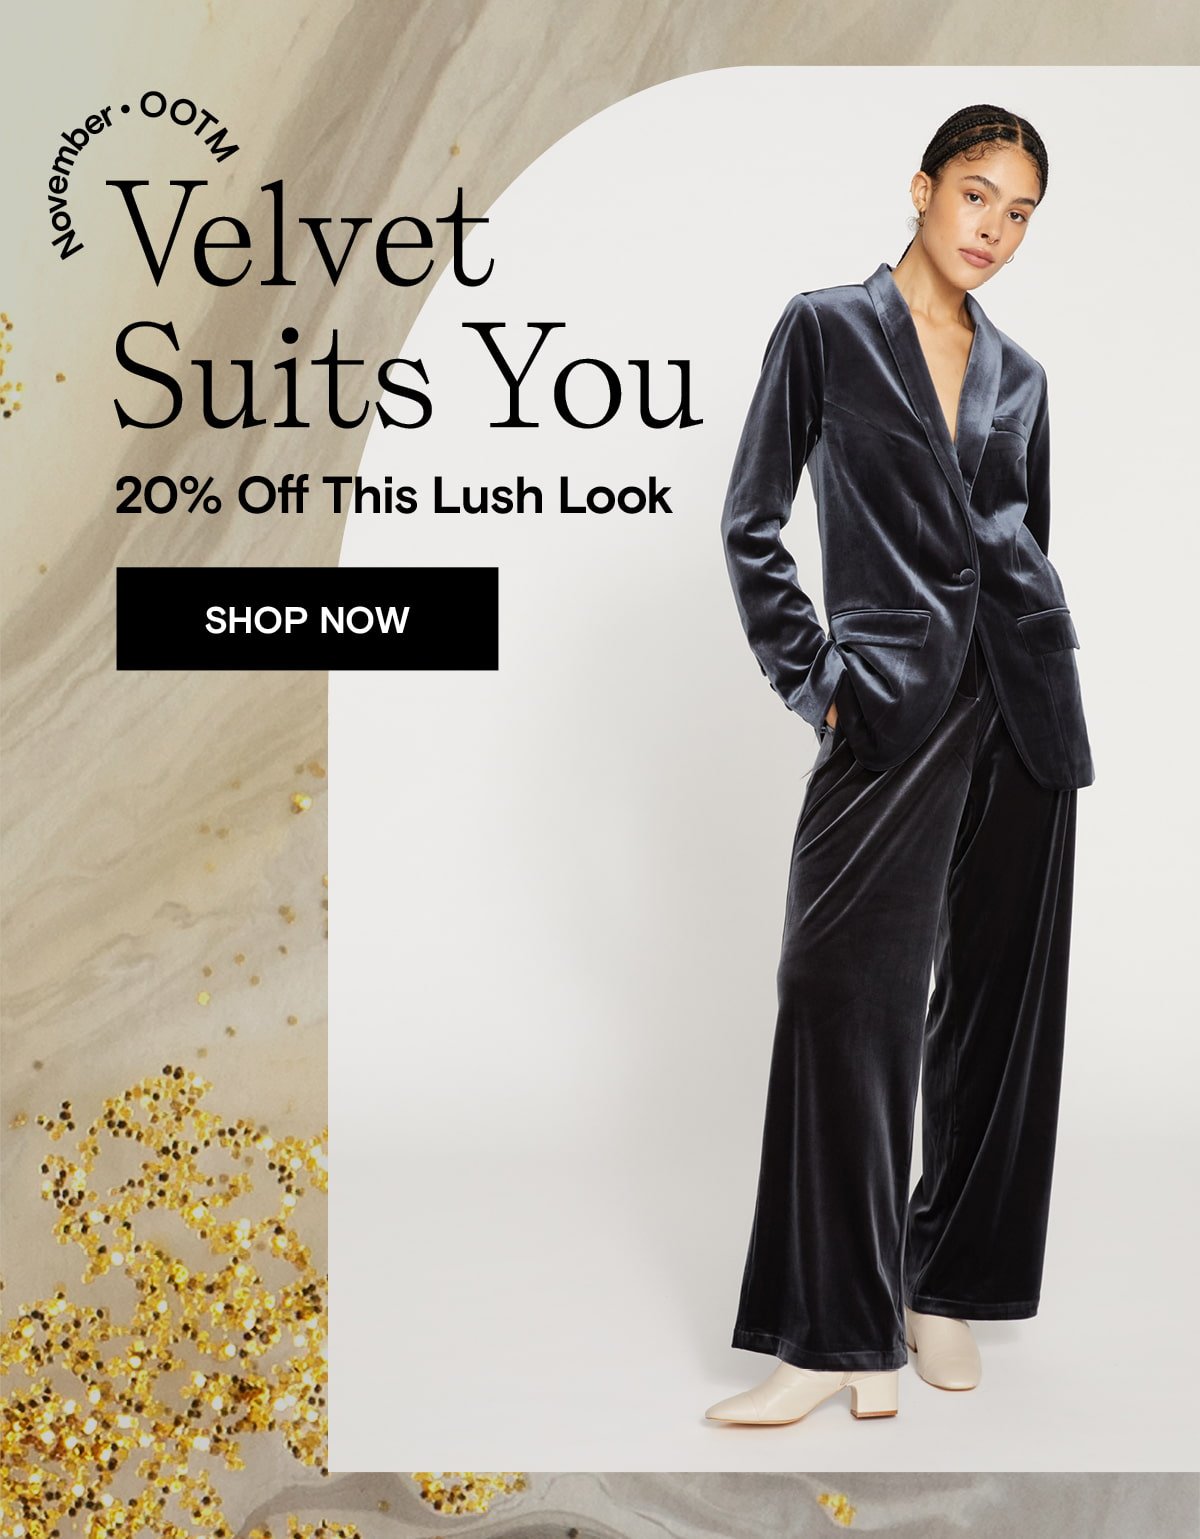 Get 20% this velvet outfit this month